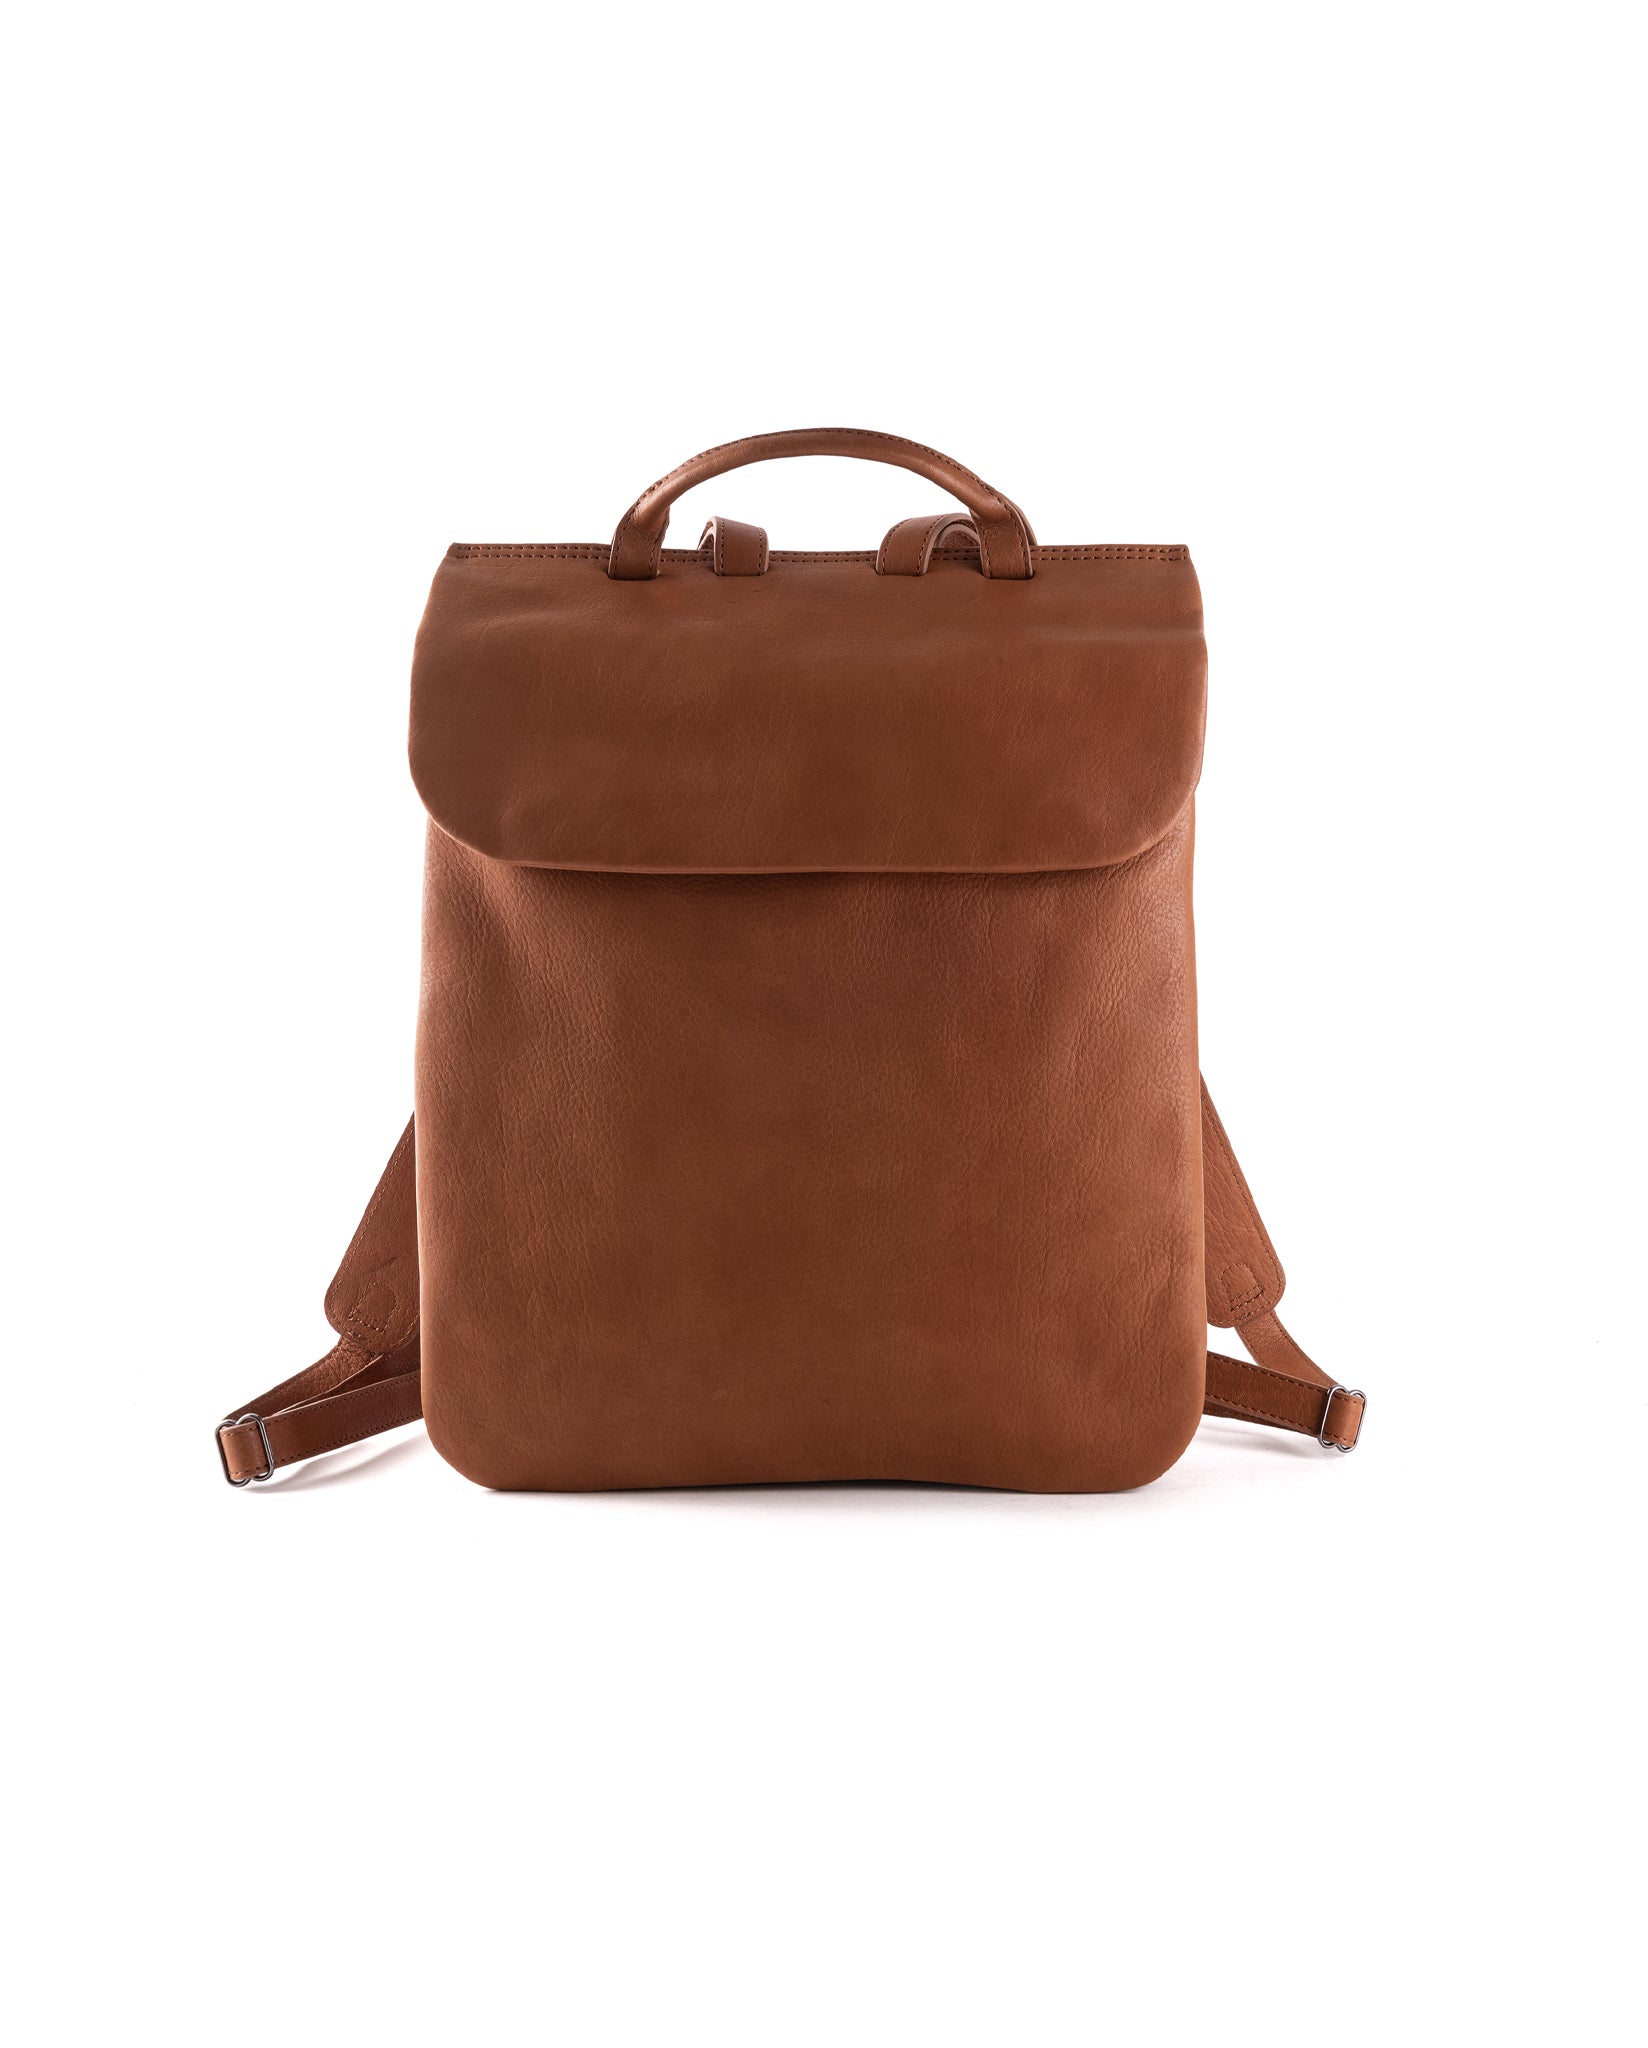 Faceta Insatisfactorio Incesante Chacoral smooth Backpack - harolds-bags